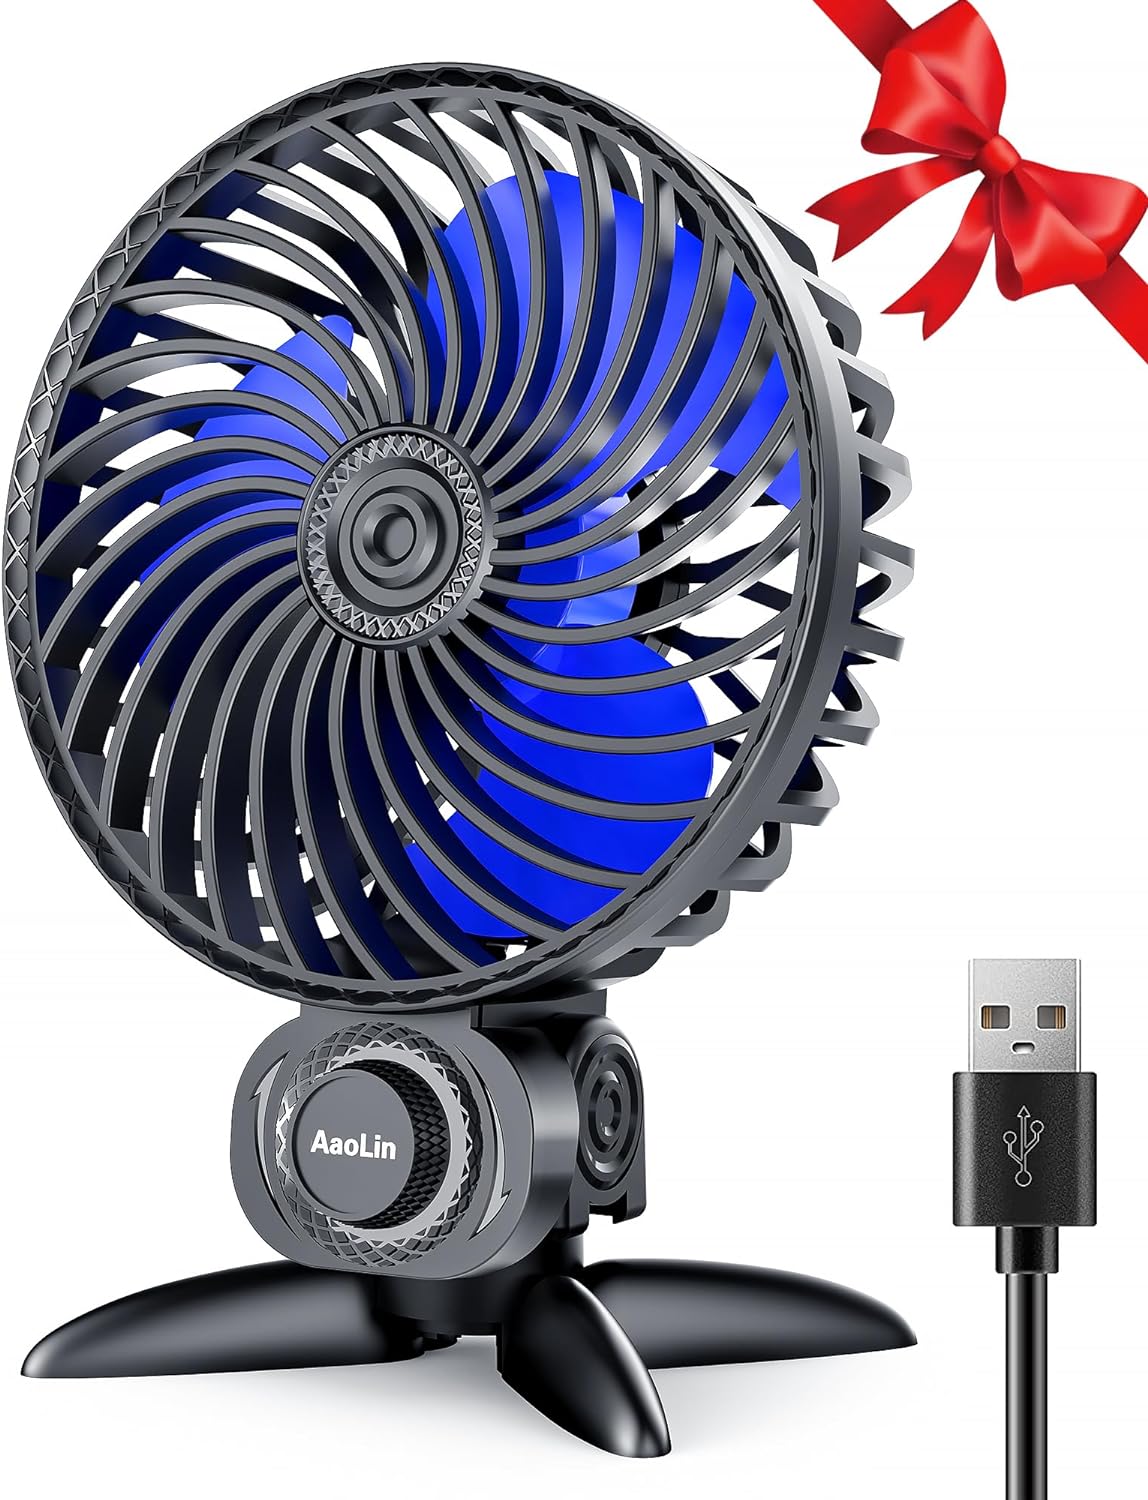 USB Small Fan, Desk Fans with CVT Variable Speeds, Strong Cooling Airflow, Quiet Portable, Desktop Mini Personal Fan for Room, Home,Office, Bedroom-USB Powered